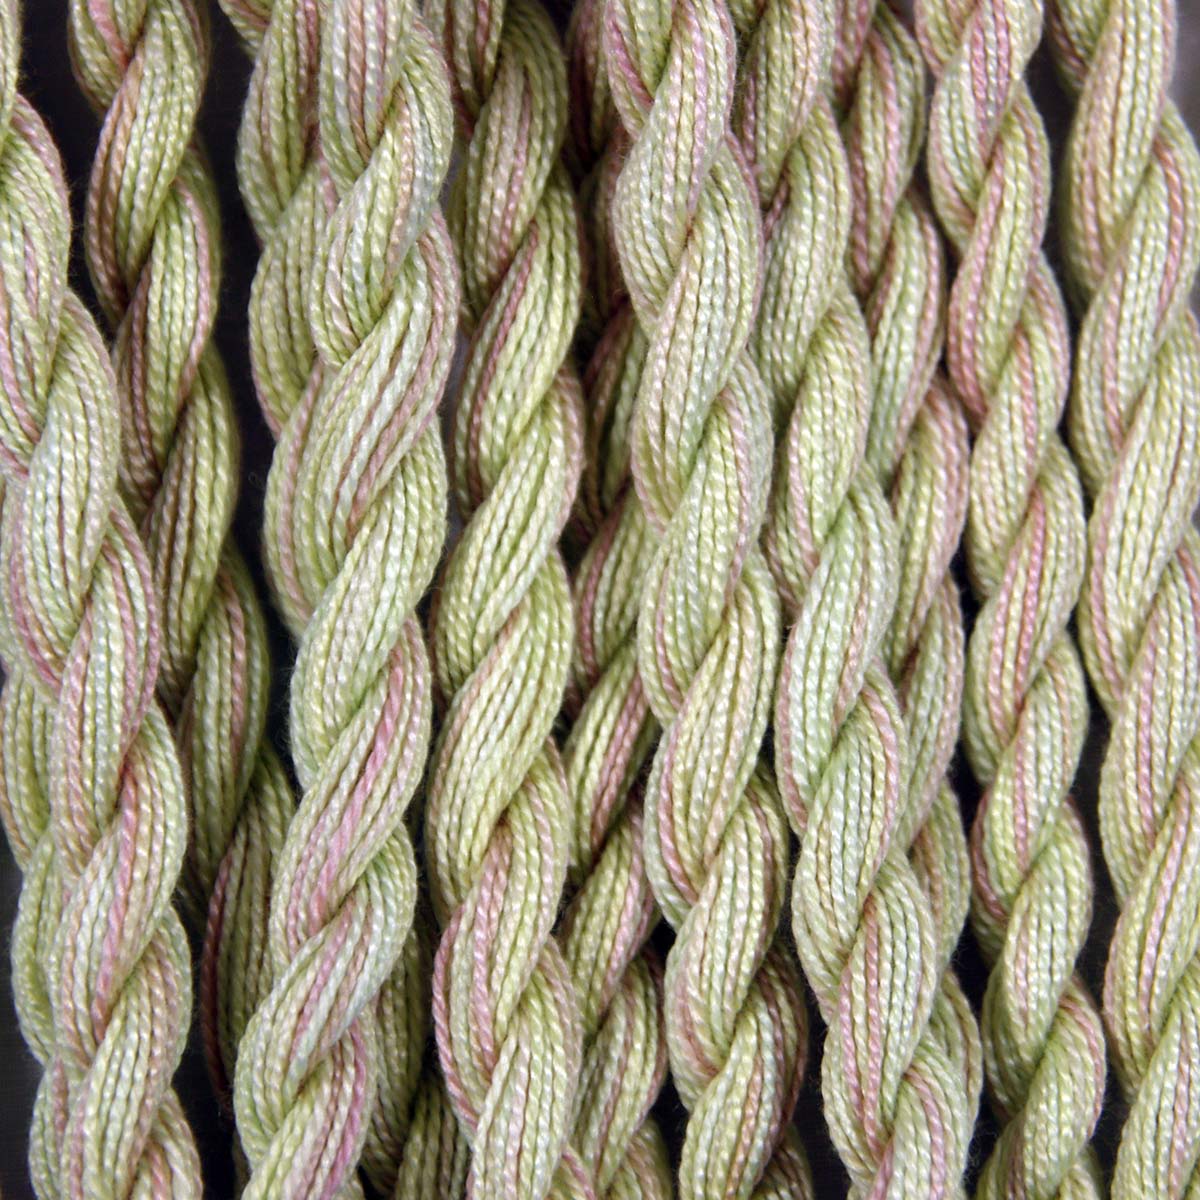 www.colourstreams.com.au Colour Streams Hand Dyed Cotton Threads Cotto Strands Slow Stitch Embroidery Textile Arts Fibre DL 43 Pistache Greens Pinks Yellows